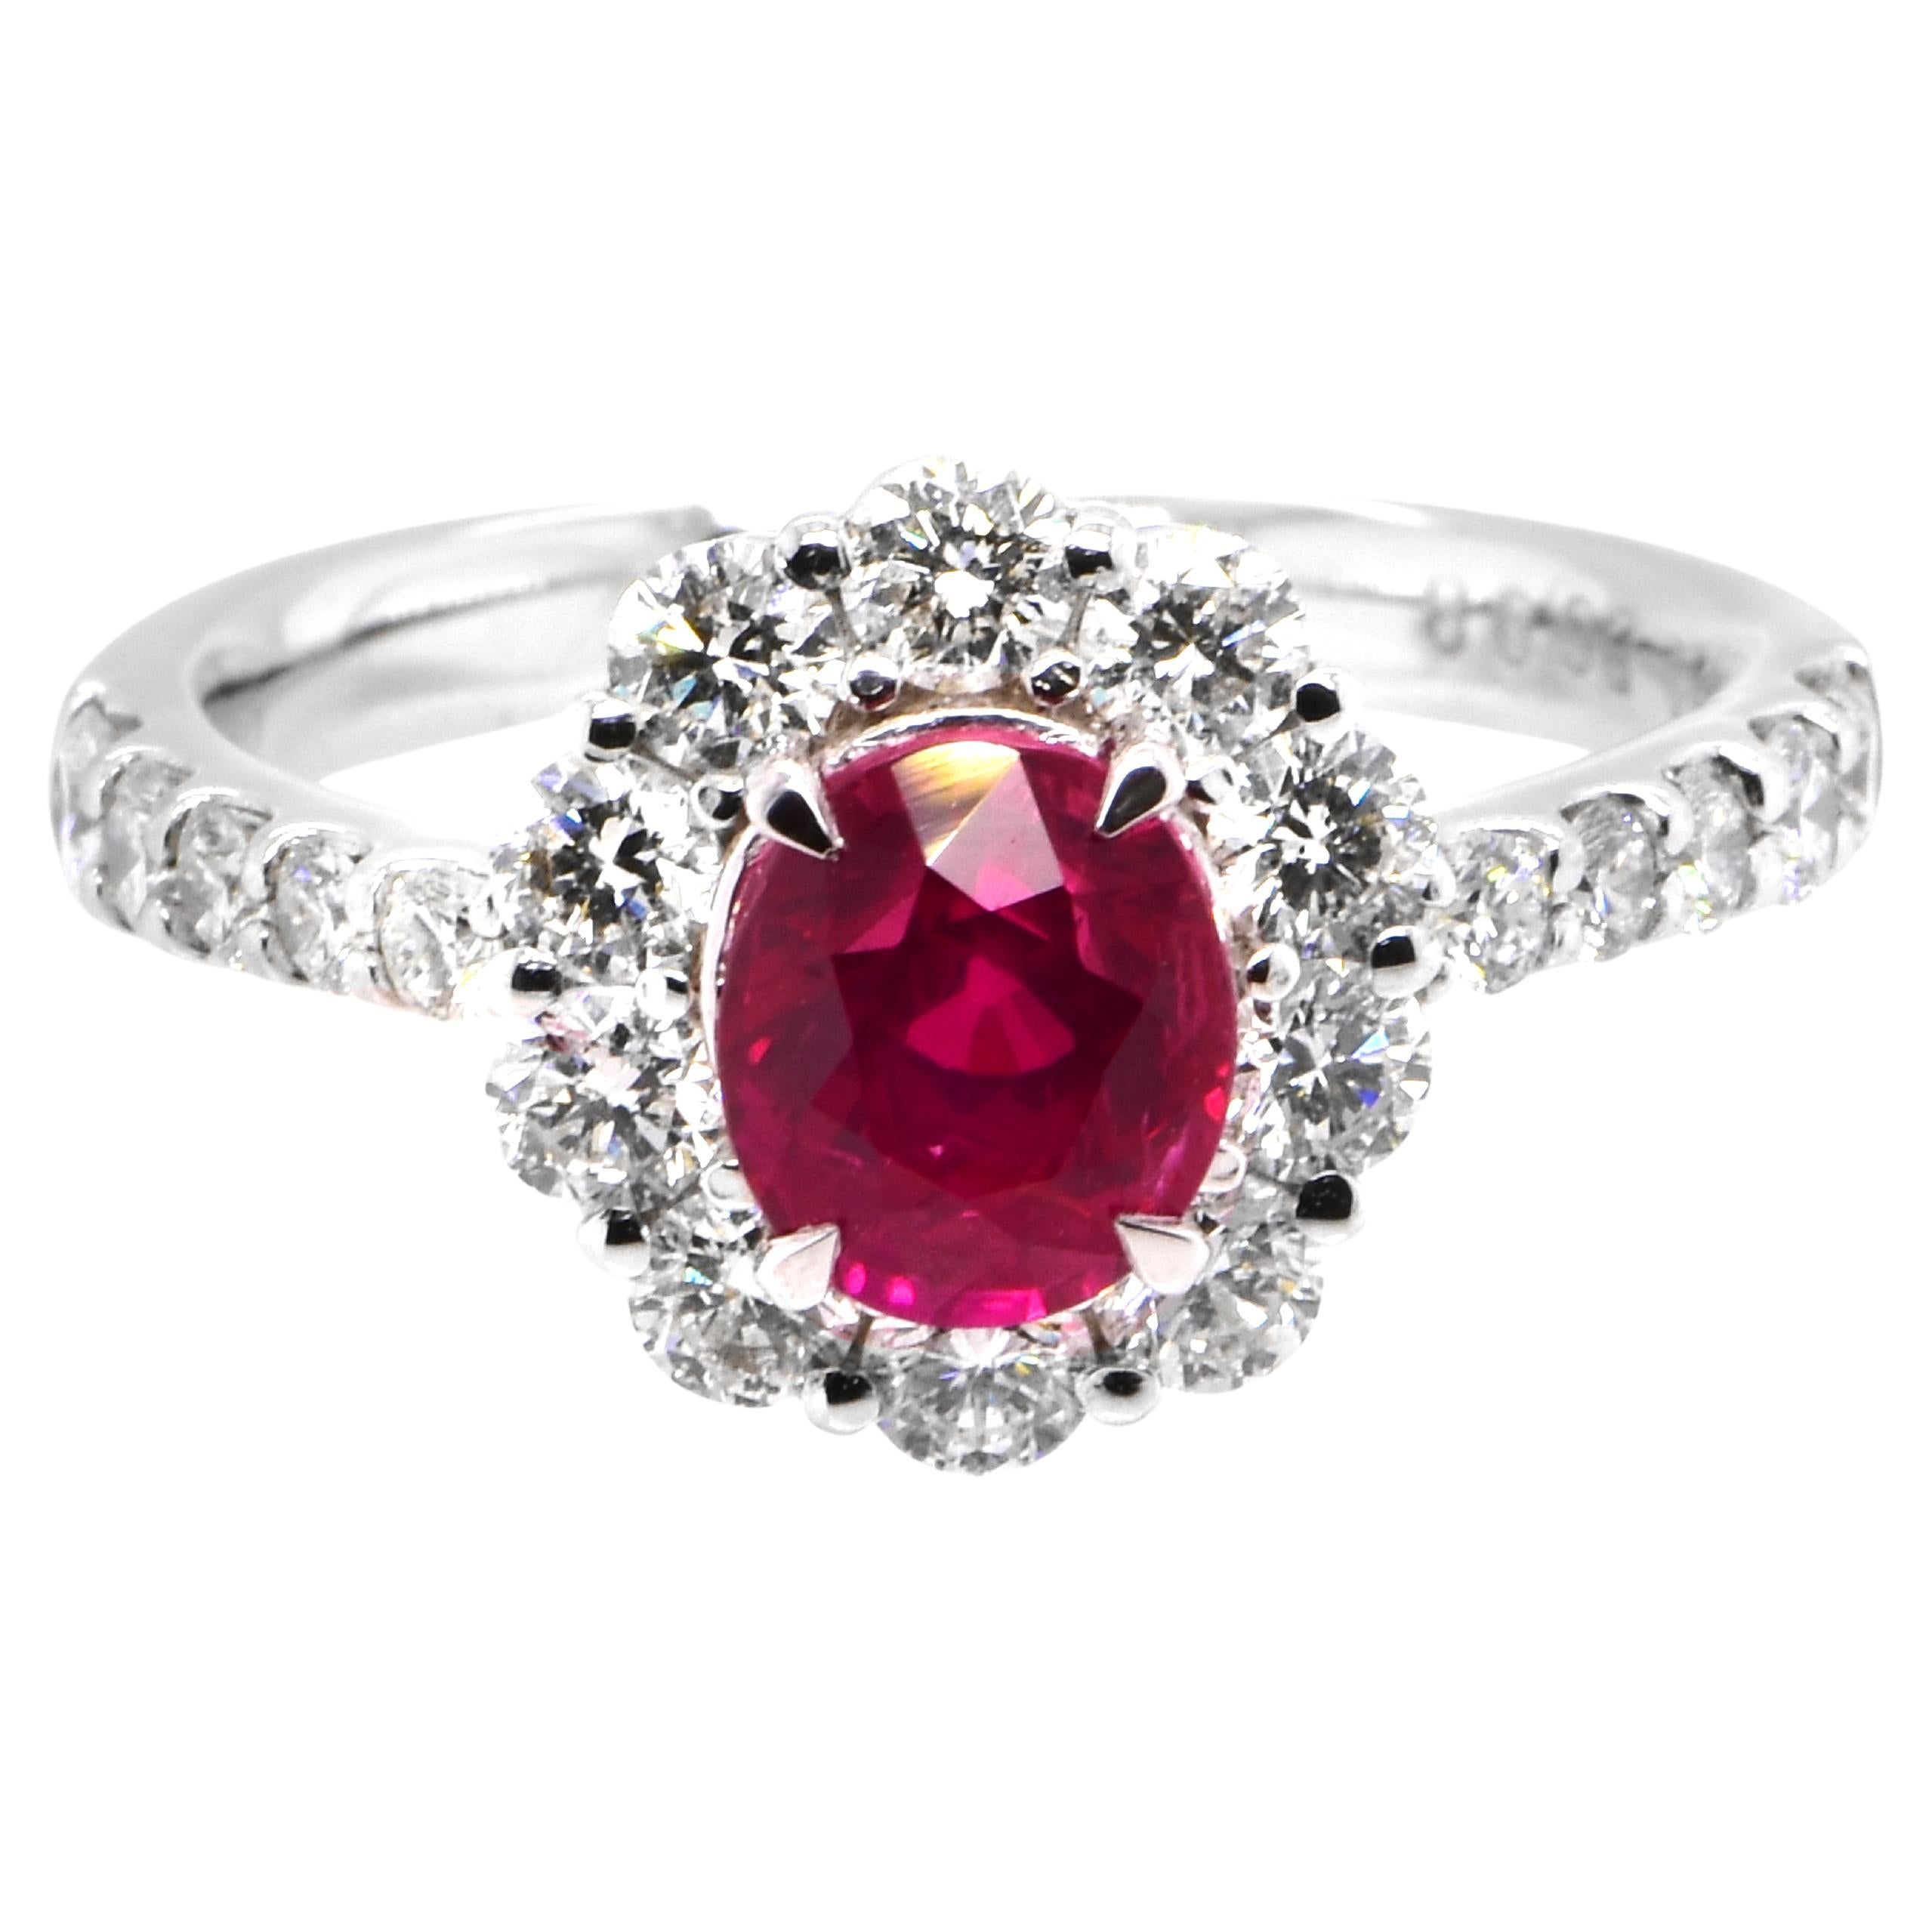 GIA Certified 1.54 Carat Untreated (No Heat) Ruby & Diamond Ring Set in Platinum For Sale